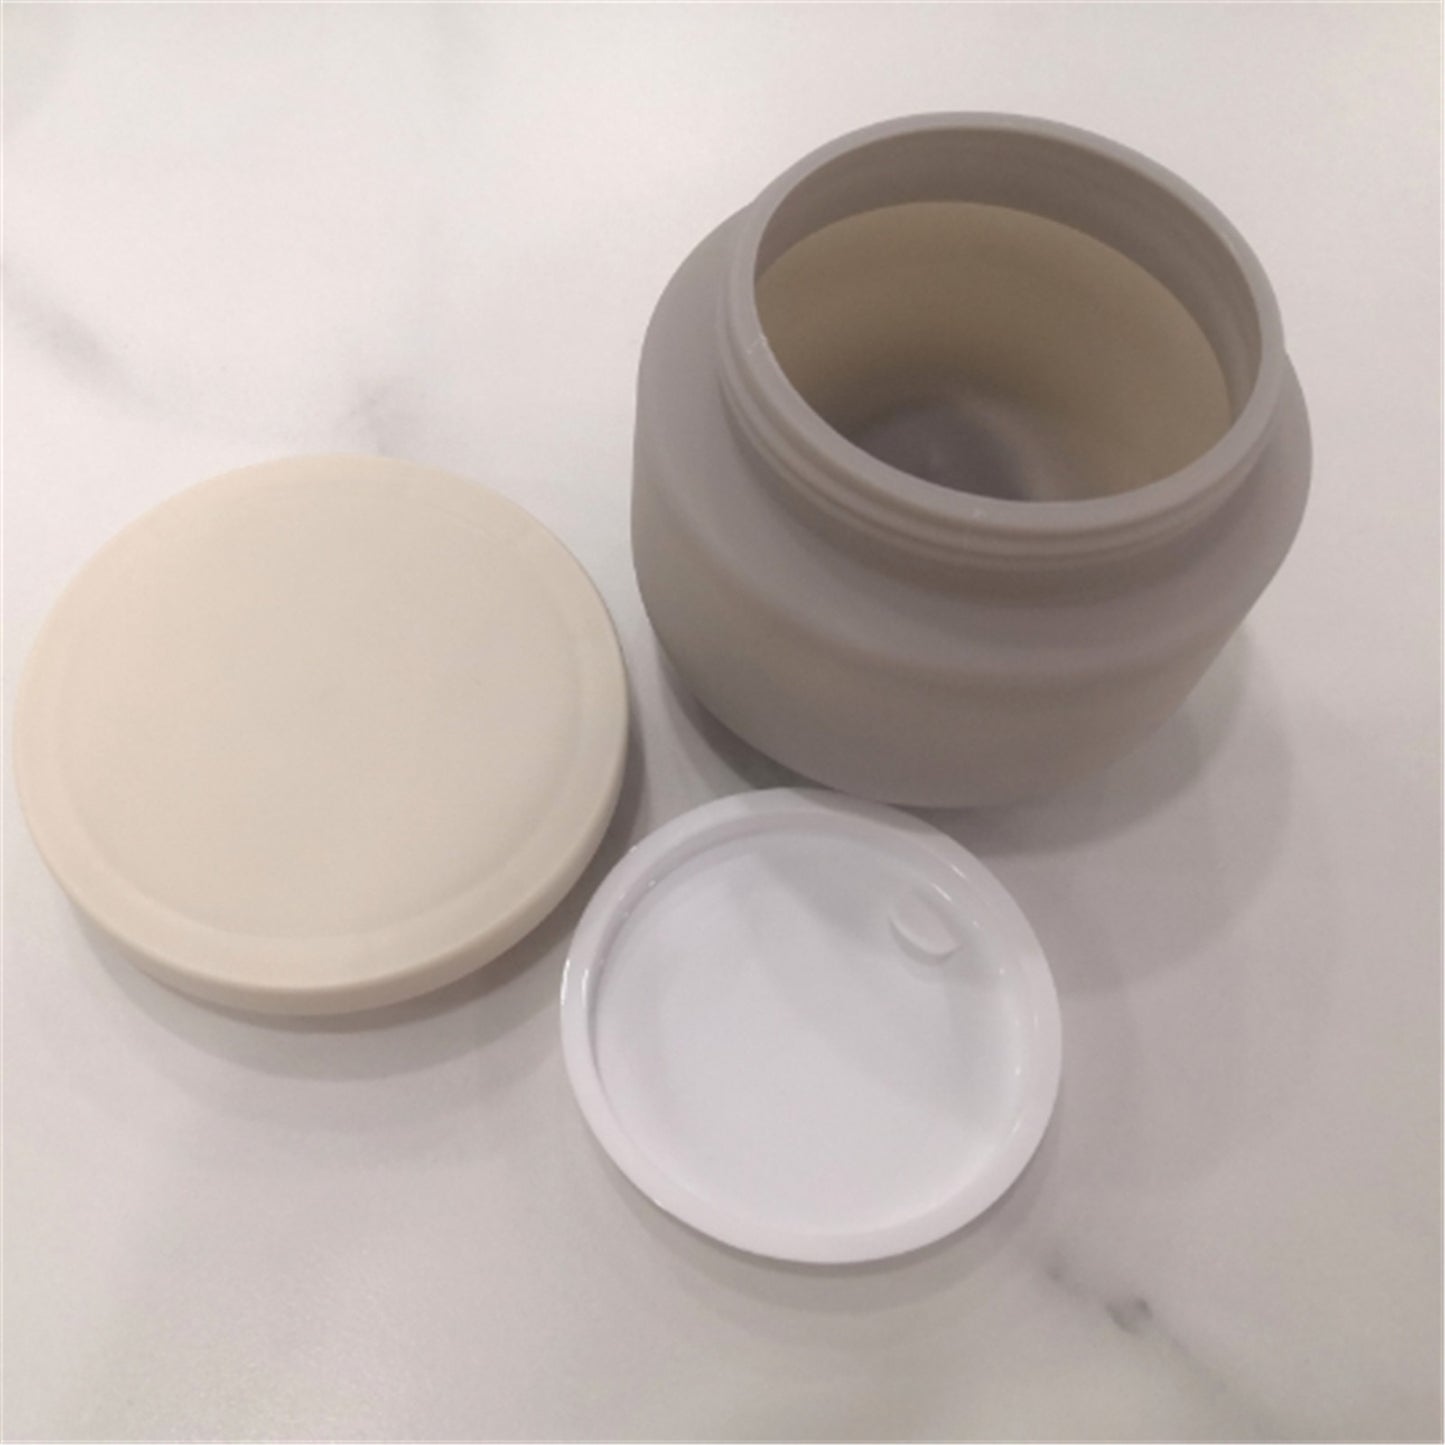 Gray Toiletry Jar with Lid- 250ml